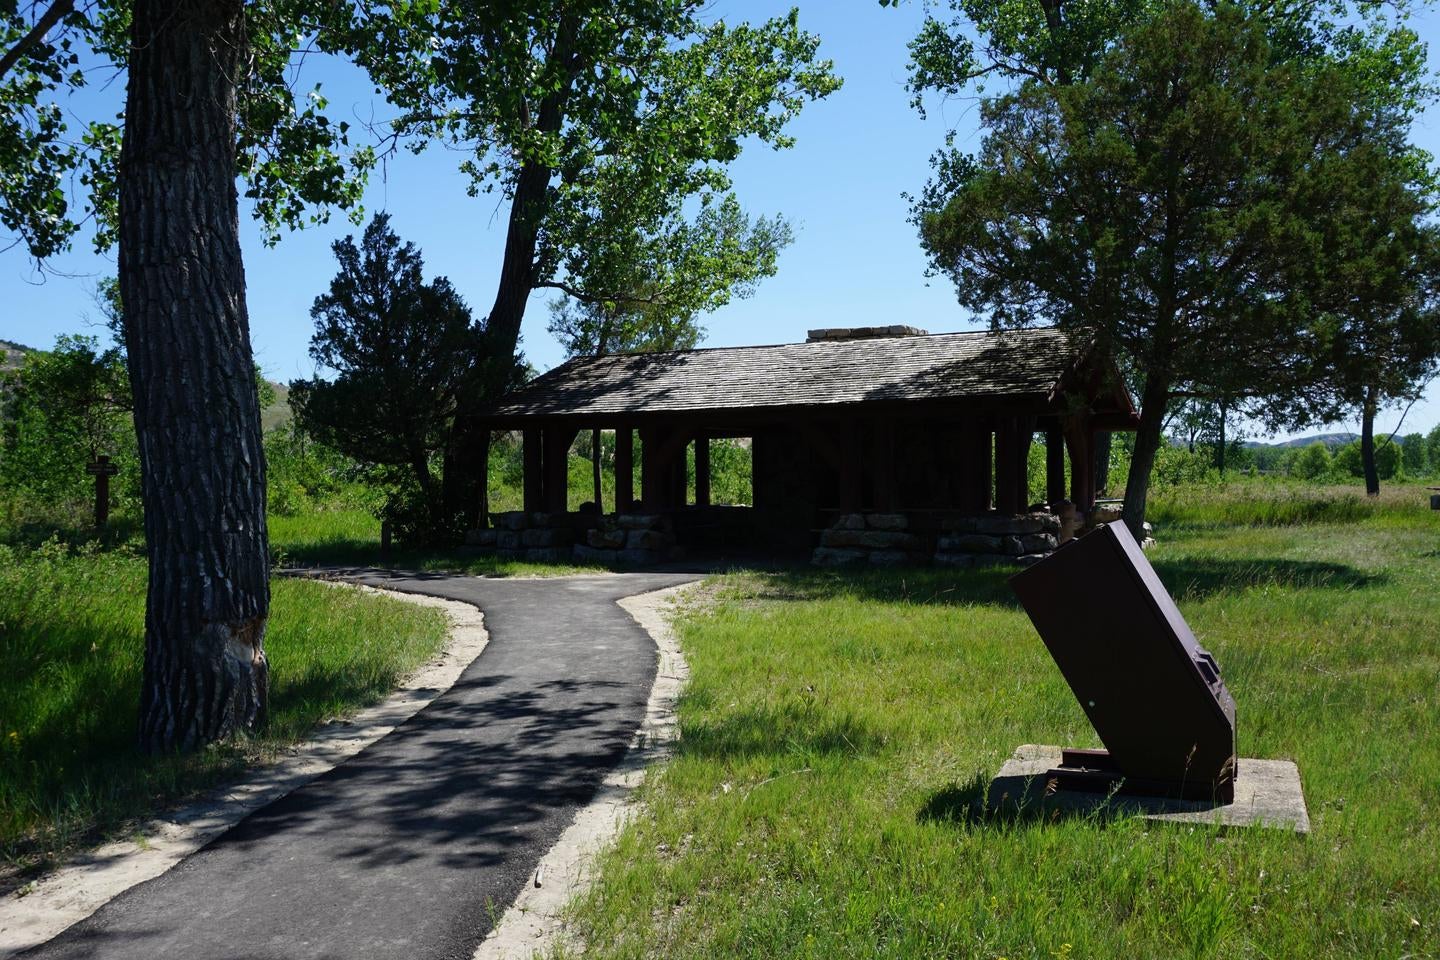 Trail leading to the covered picnic shelter



Picnic Shelter in site

Credit: NPS